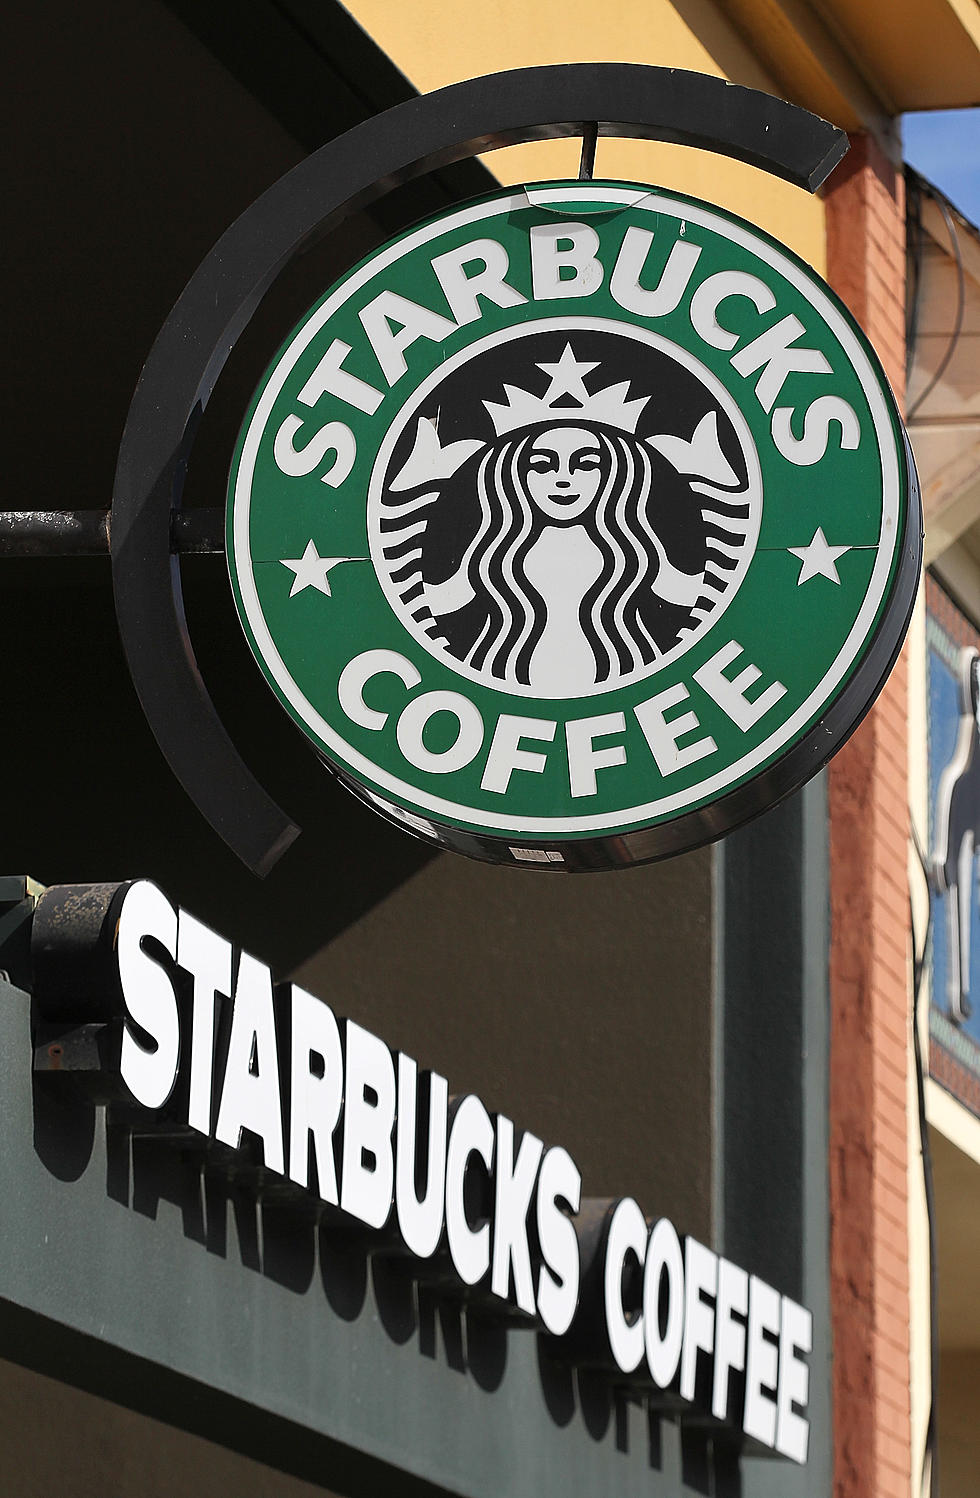 Forget the Cup Controversy! Starbucks Offers Free College For Vets!